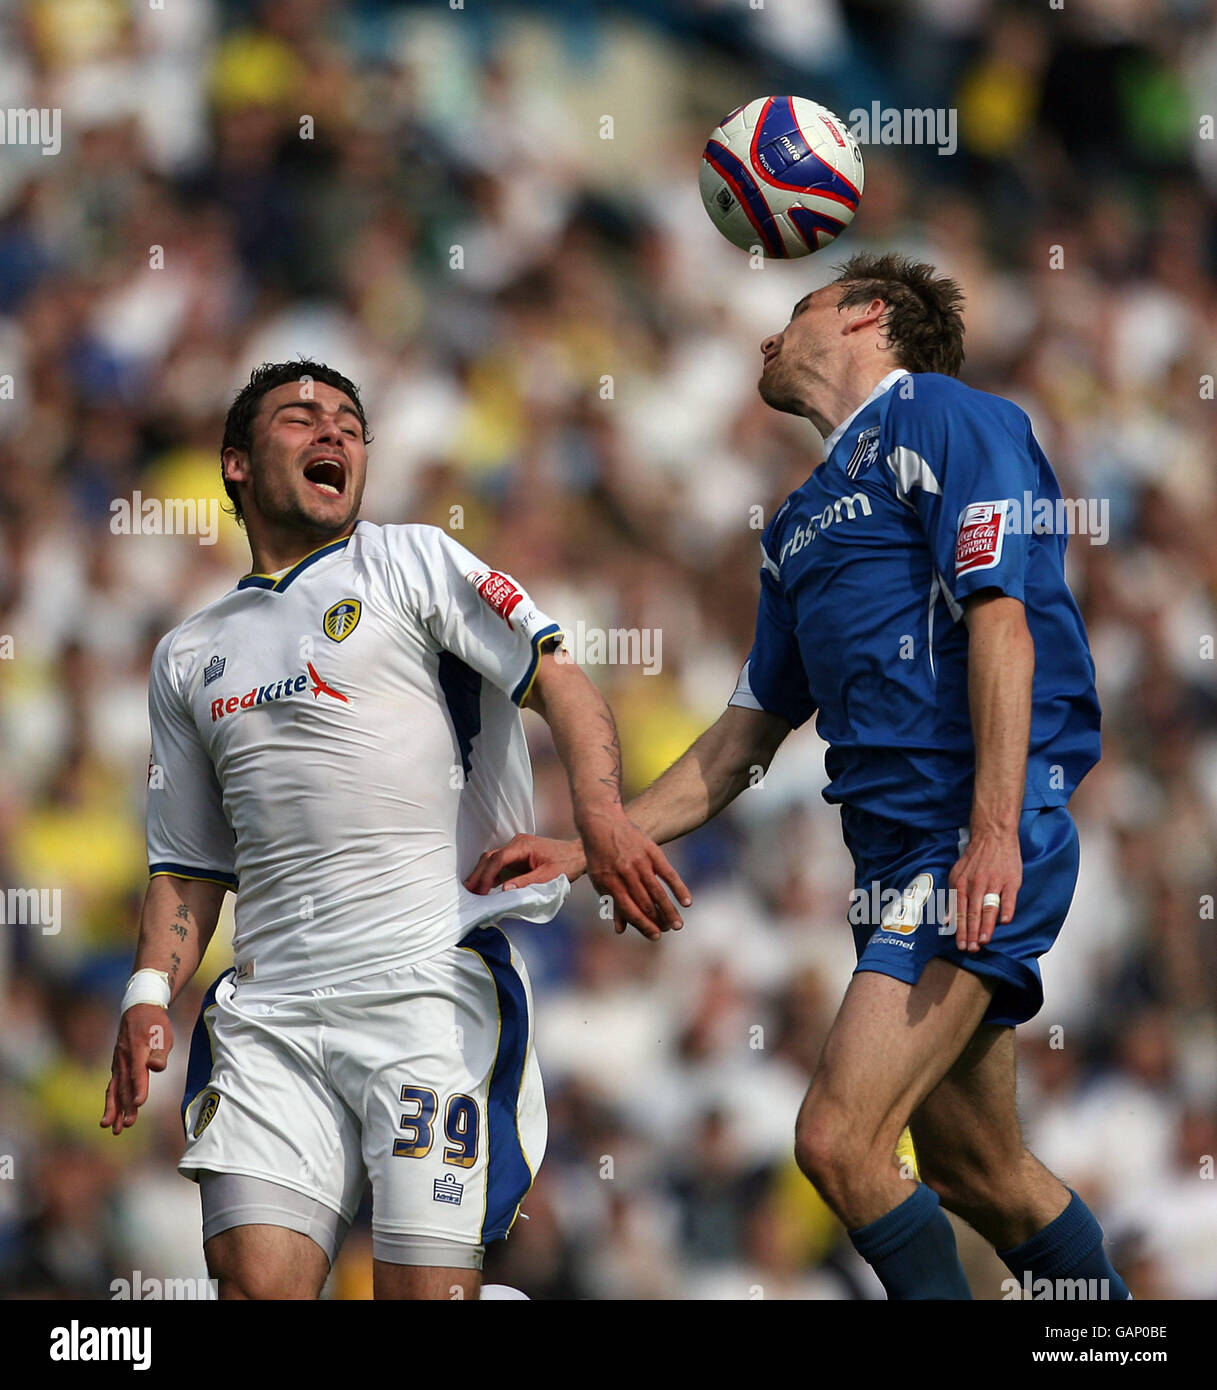 Leeds United's Anthony Elding and Gillingham's Mark Bentley in action during the Coca-Cola League One match at Elland Road, Leeds. Stock Photo